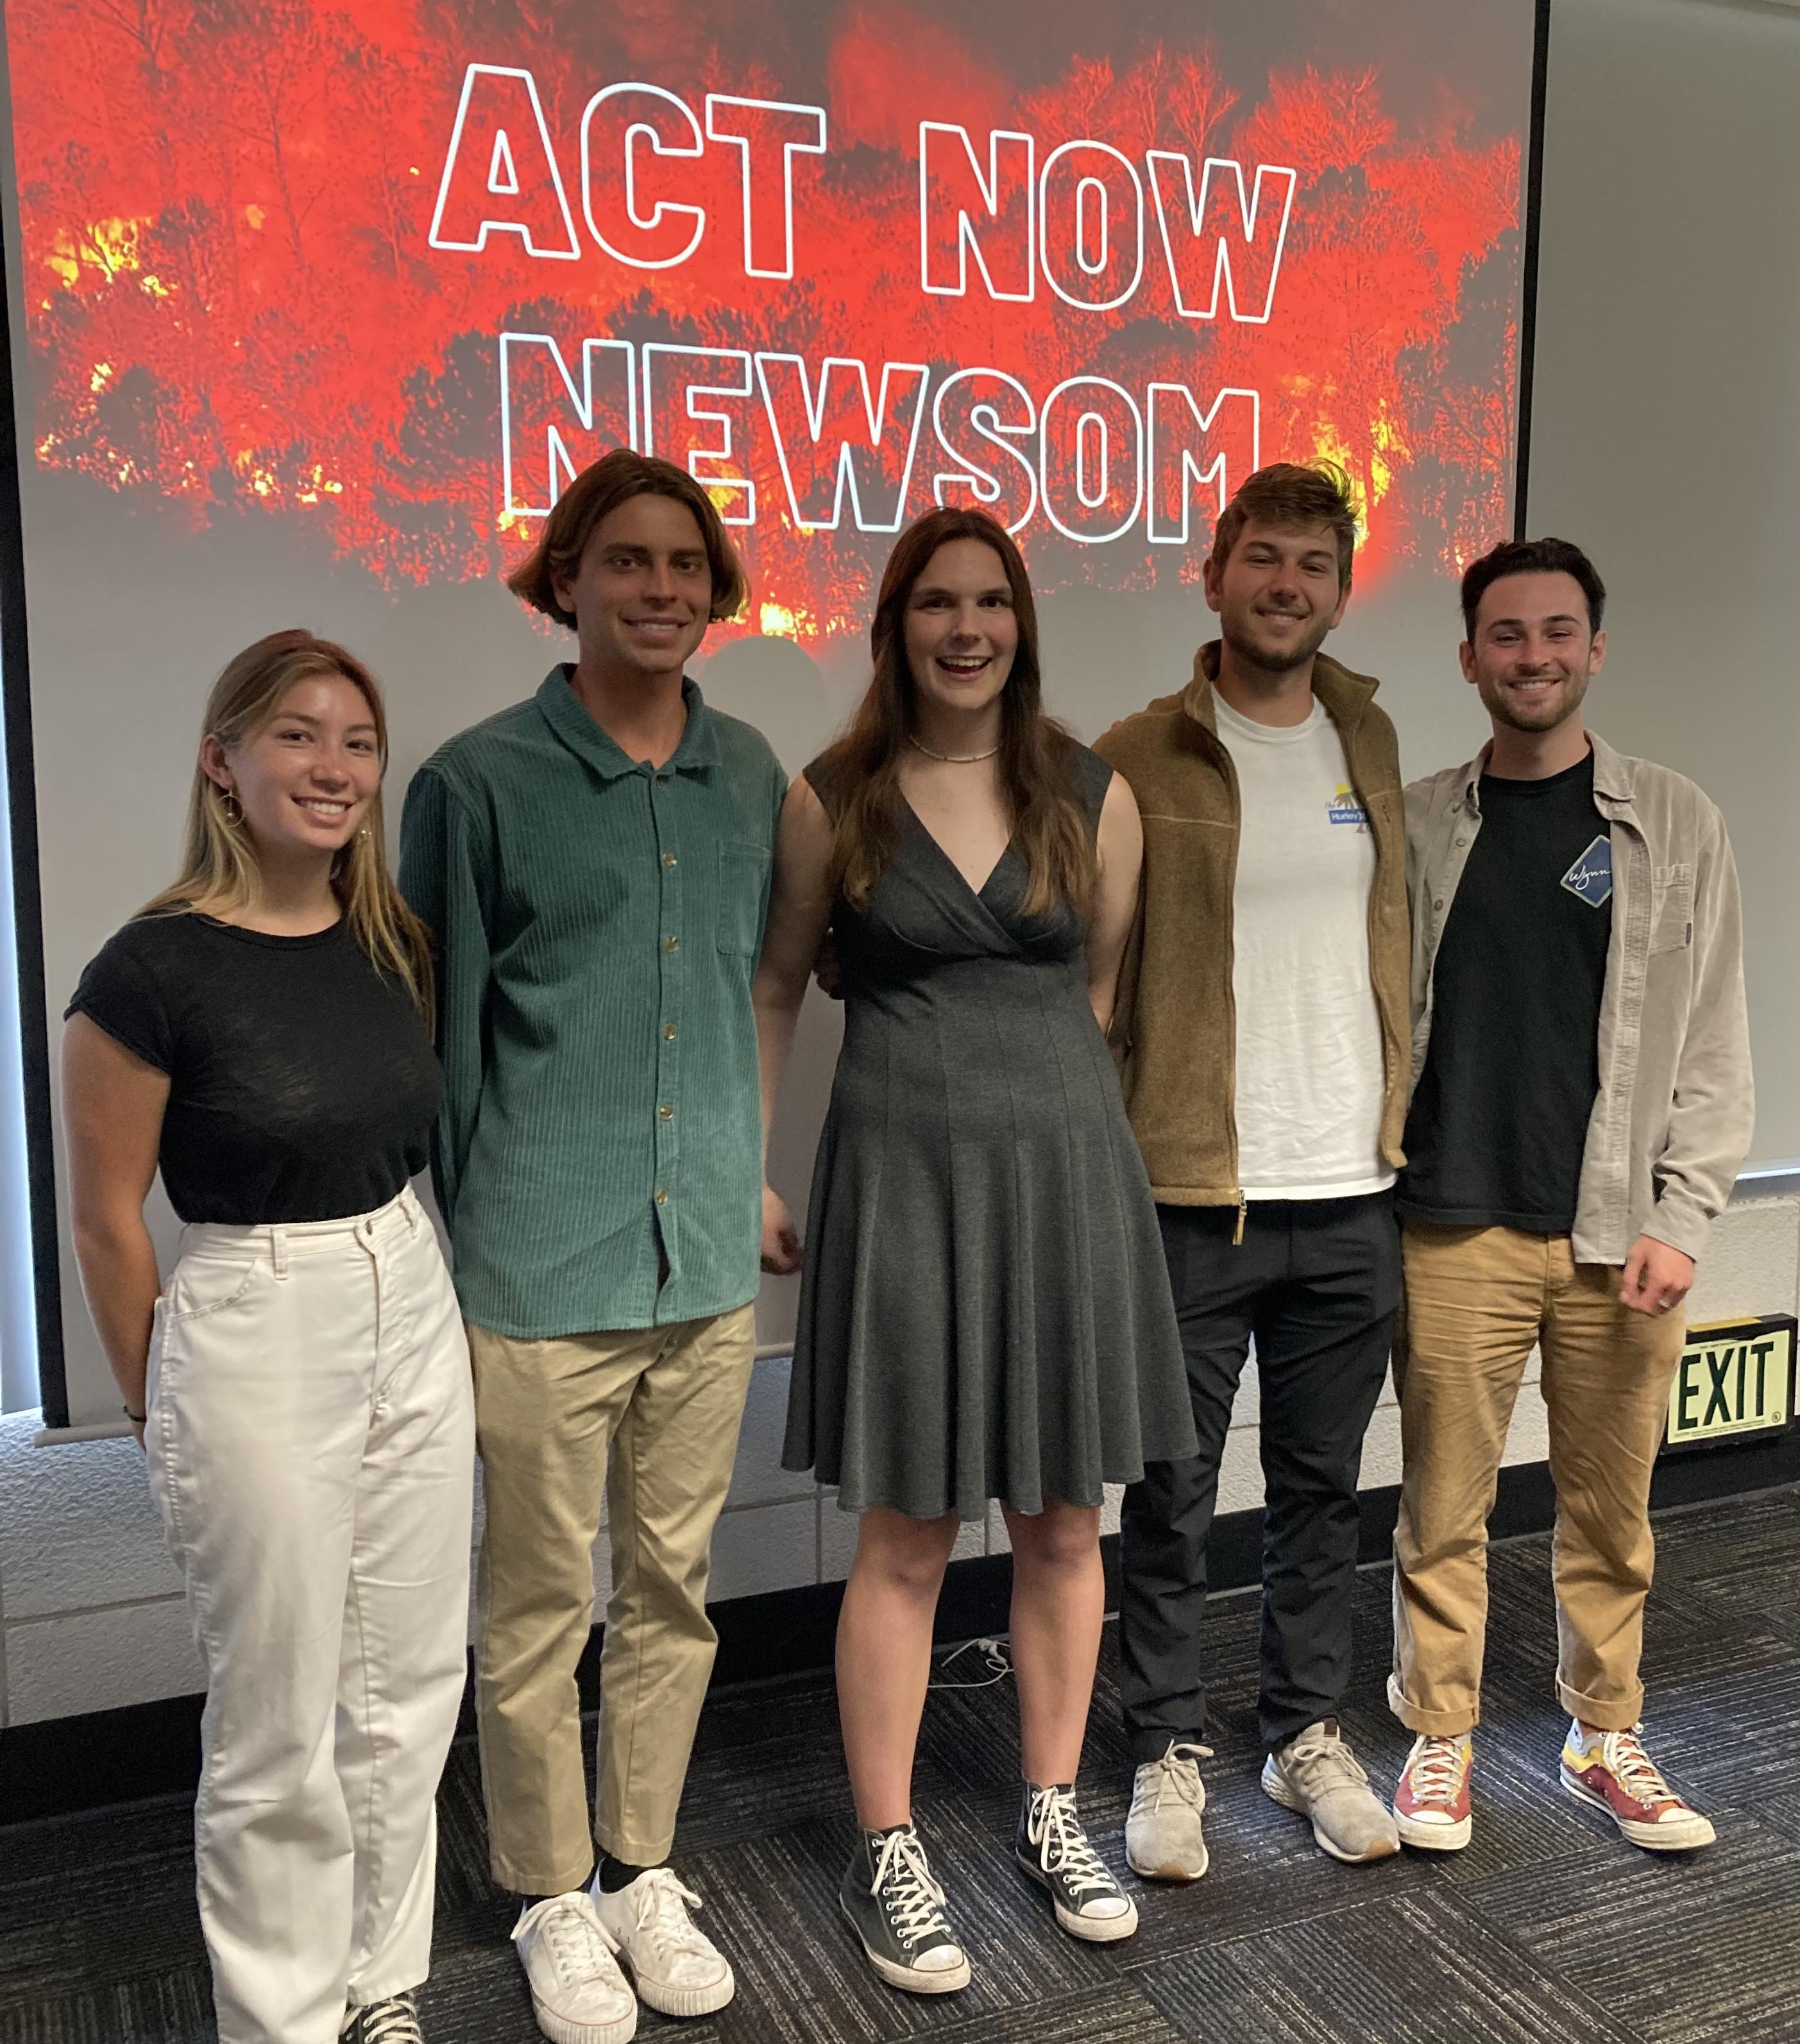 Four ELI Students Stand in Front of "Act Now Newsom"